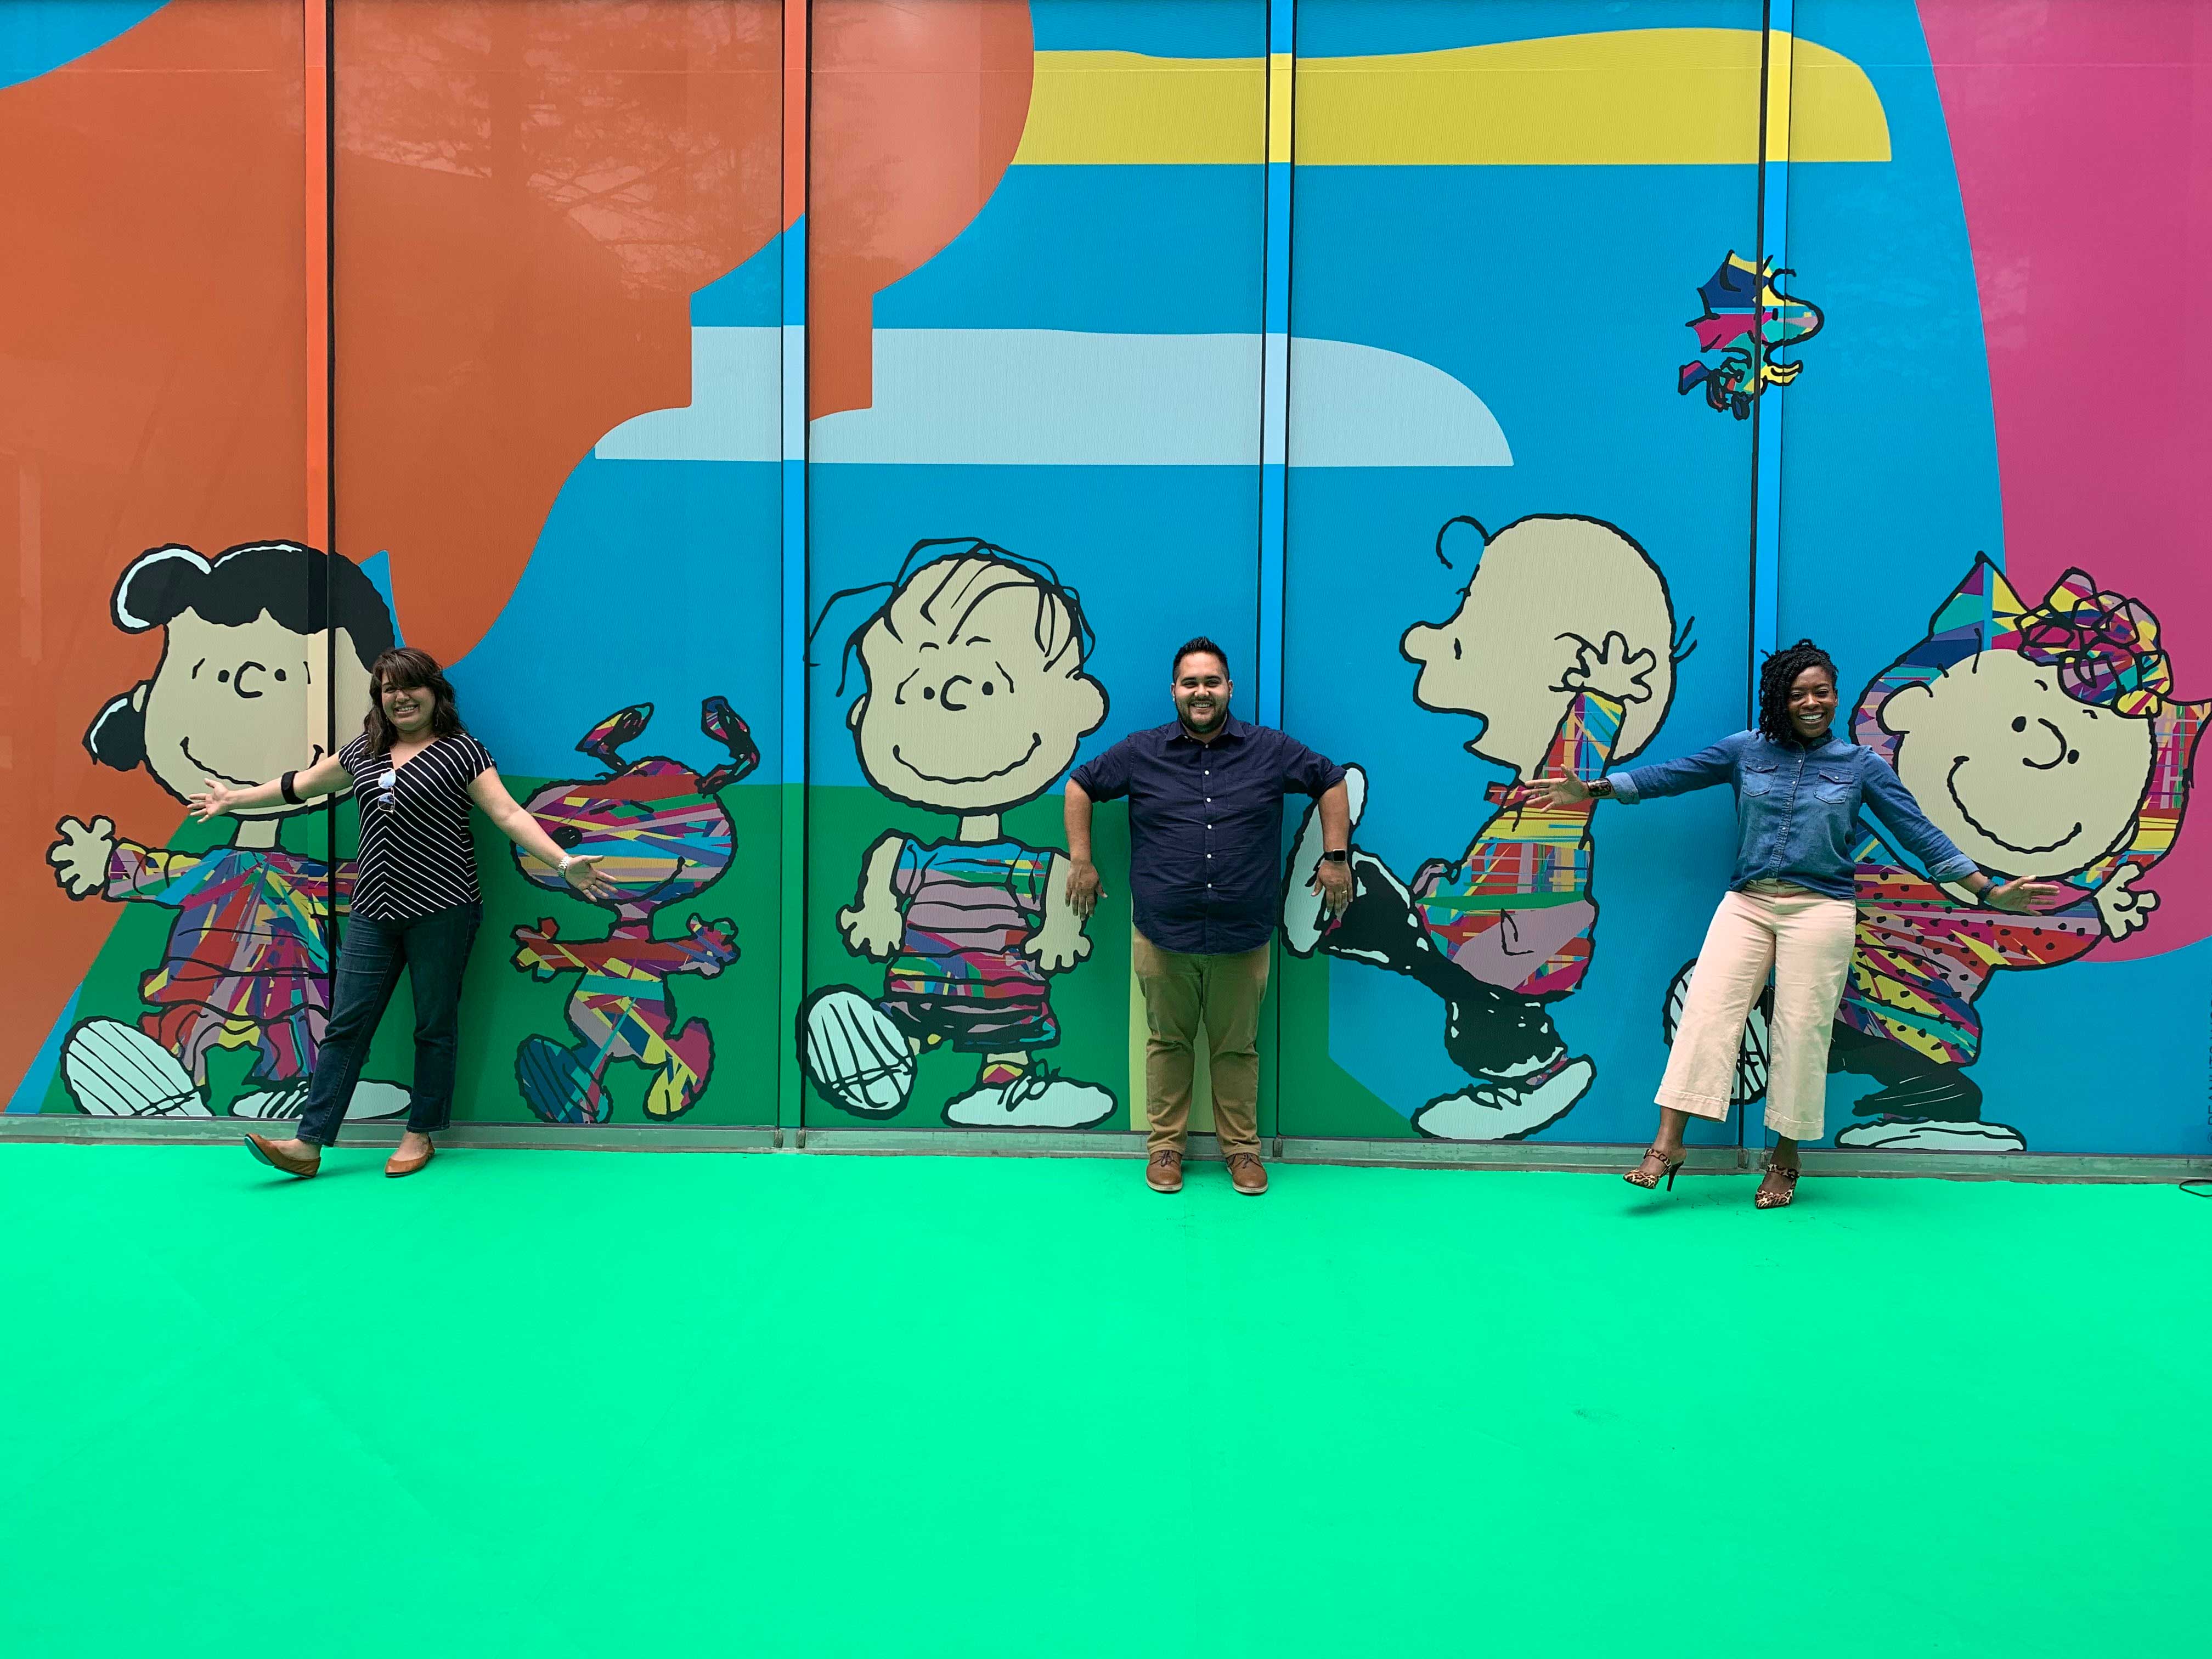 Peanuts Inspired Murals By Kenny Scharf And Avaf Land In Houston